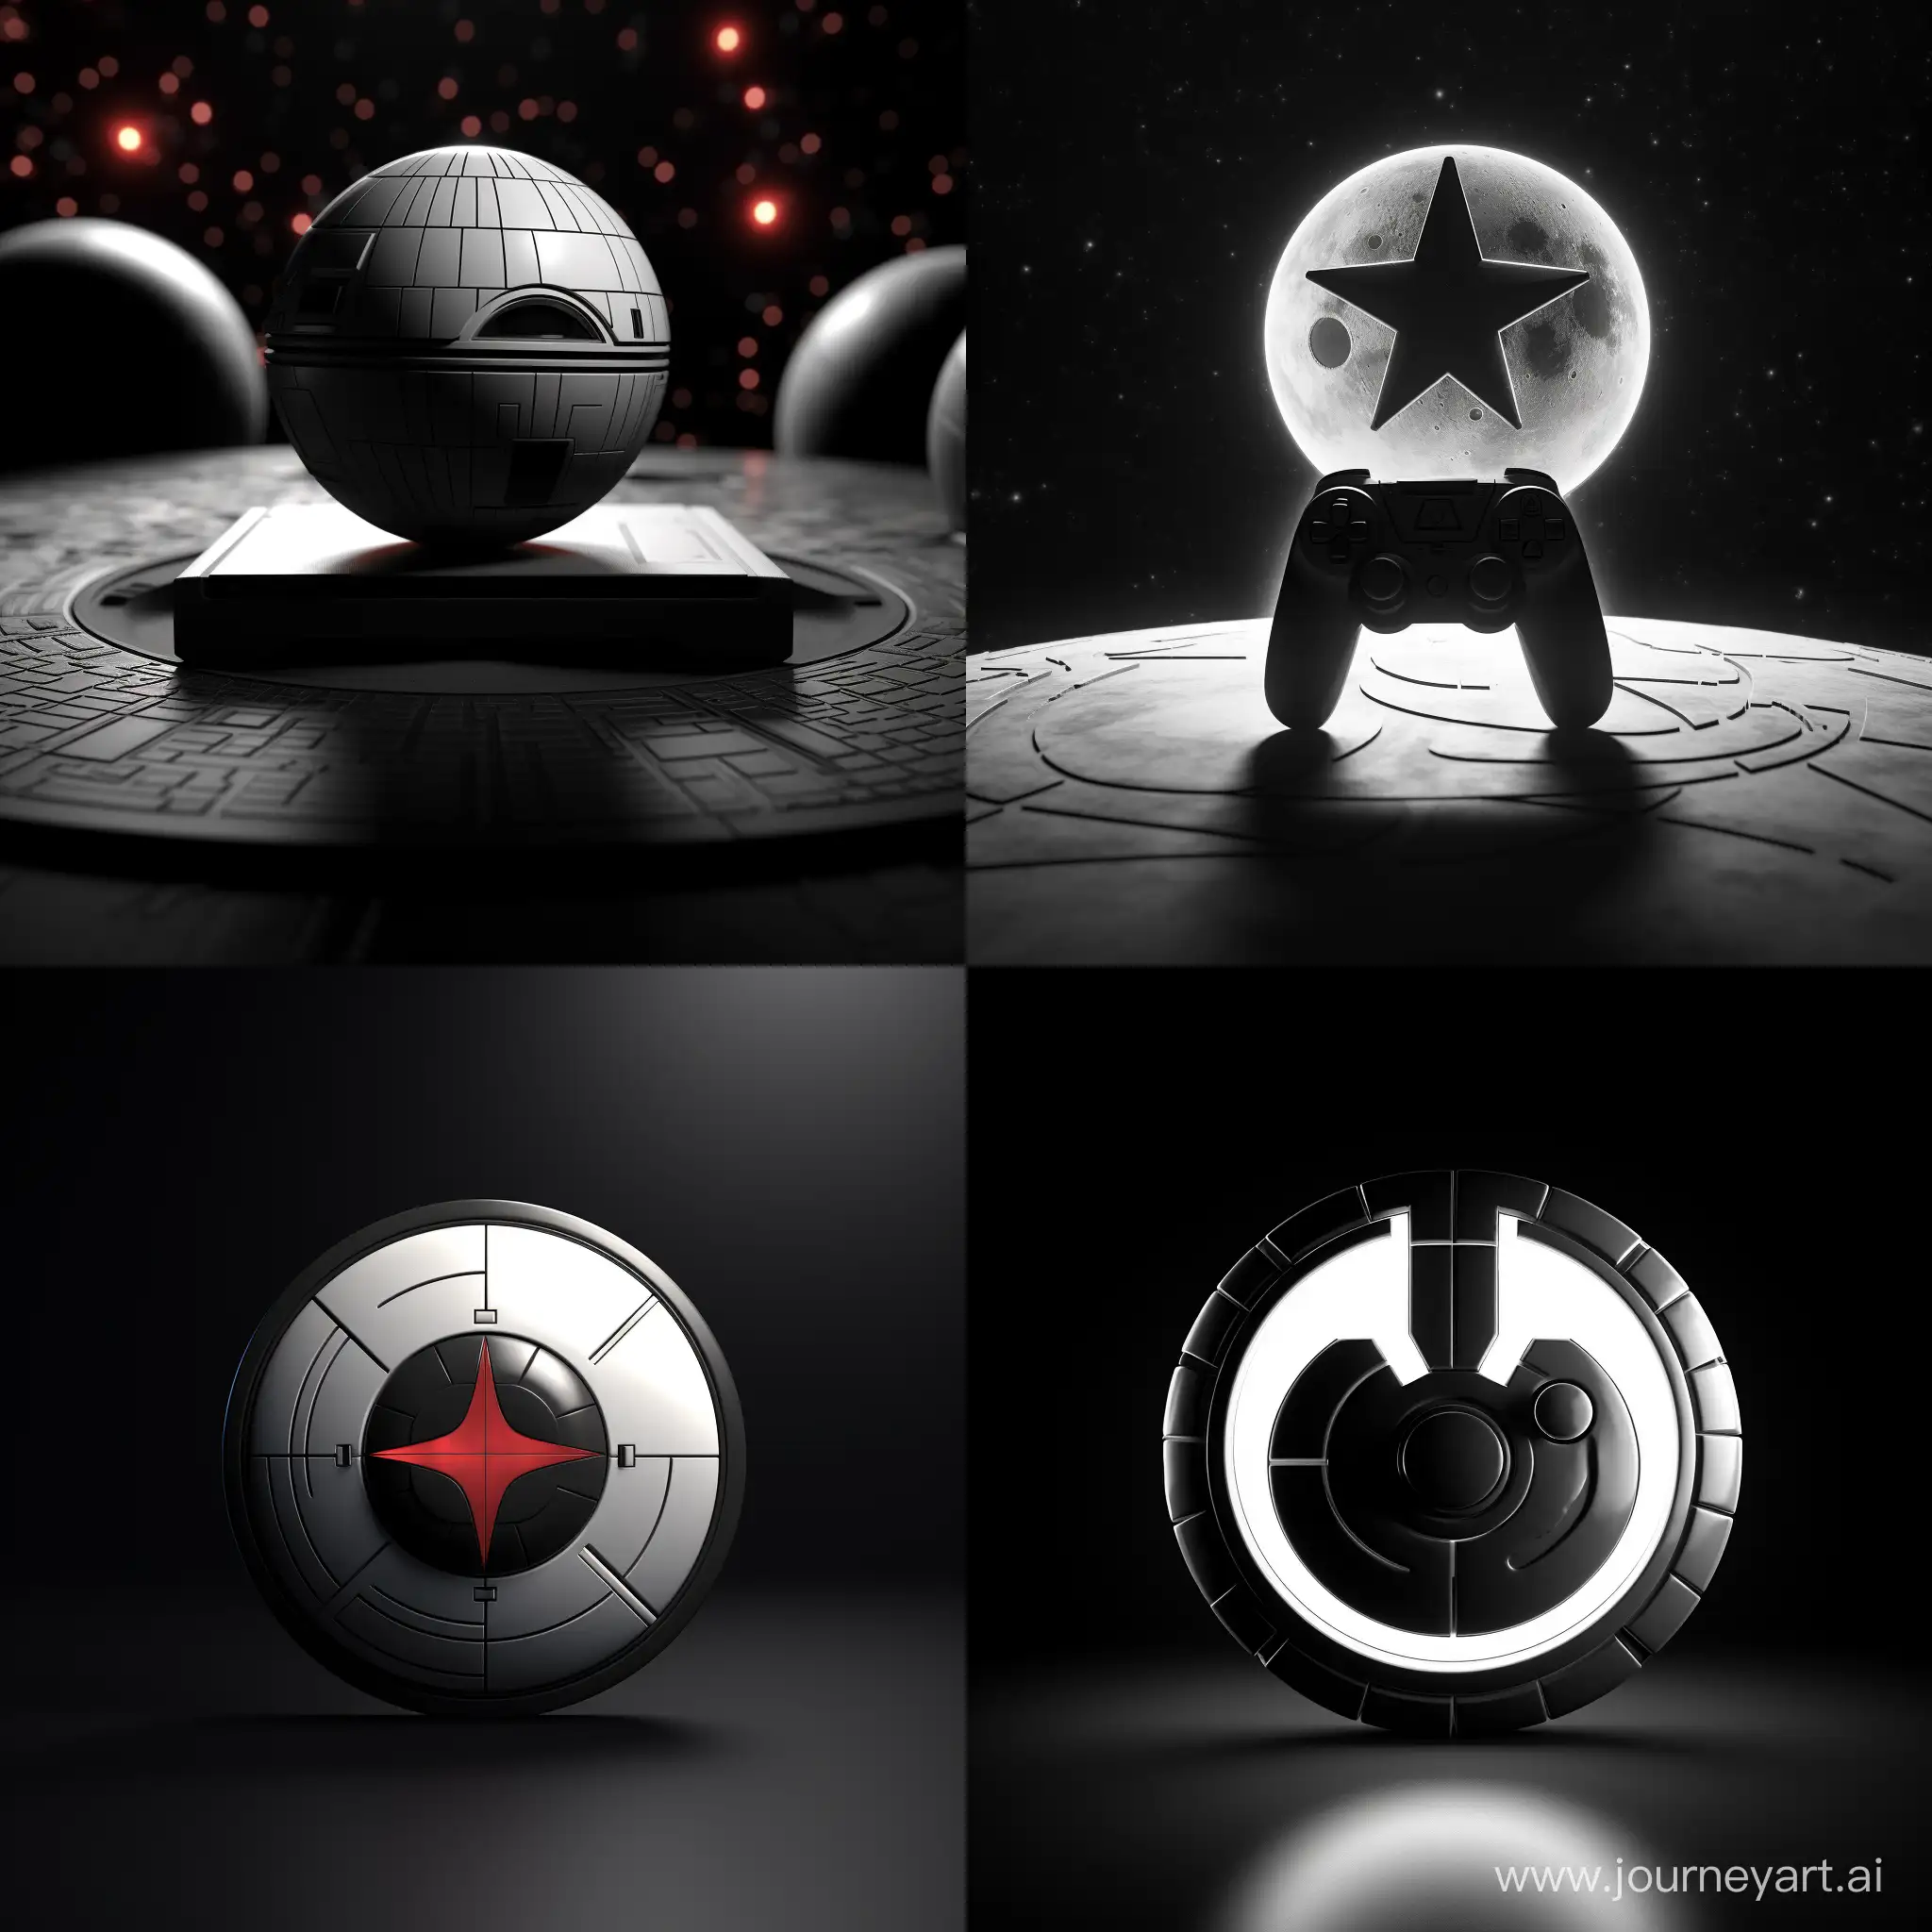 Contrast-of-Star-Wars-Logo-and-Joystick-in-Striking-Black-and-White-4K-Rendering